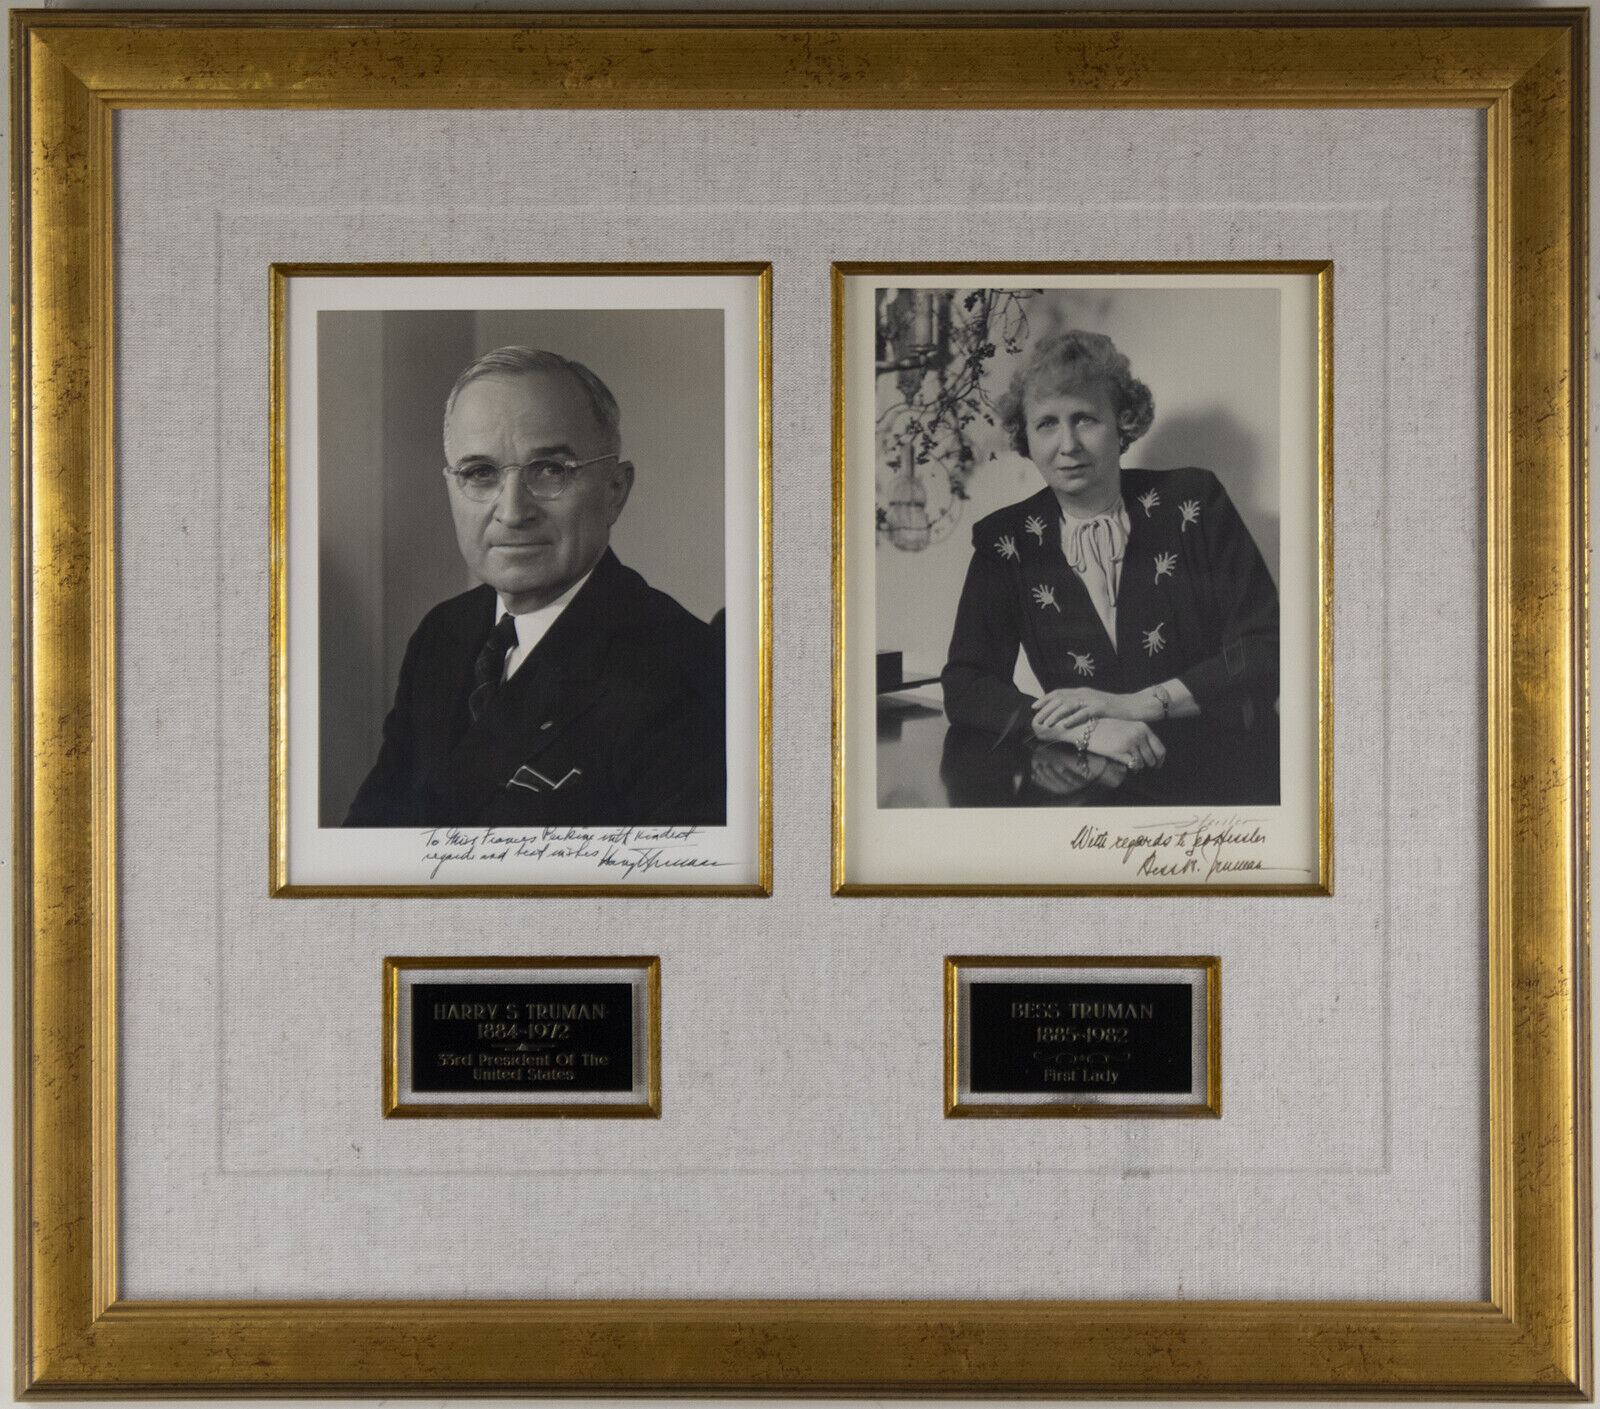 HARRY S TRUMAN - COLLECTION WITH BESS W. TRUMAN